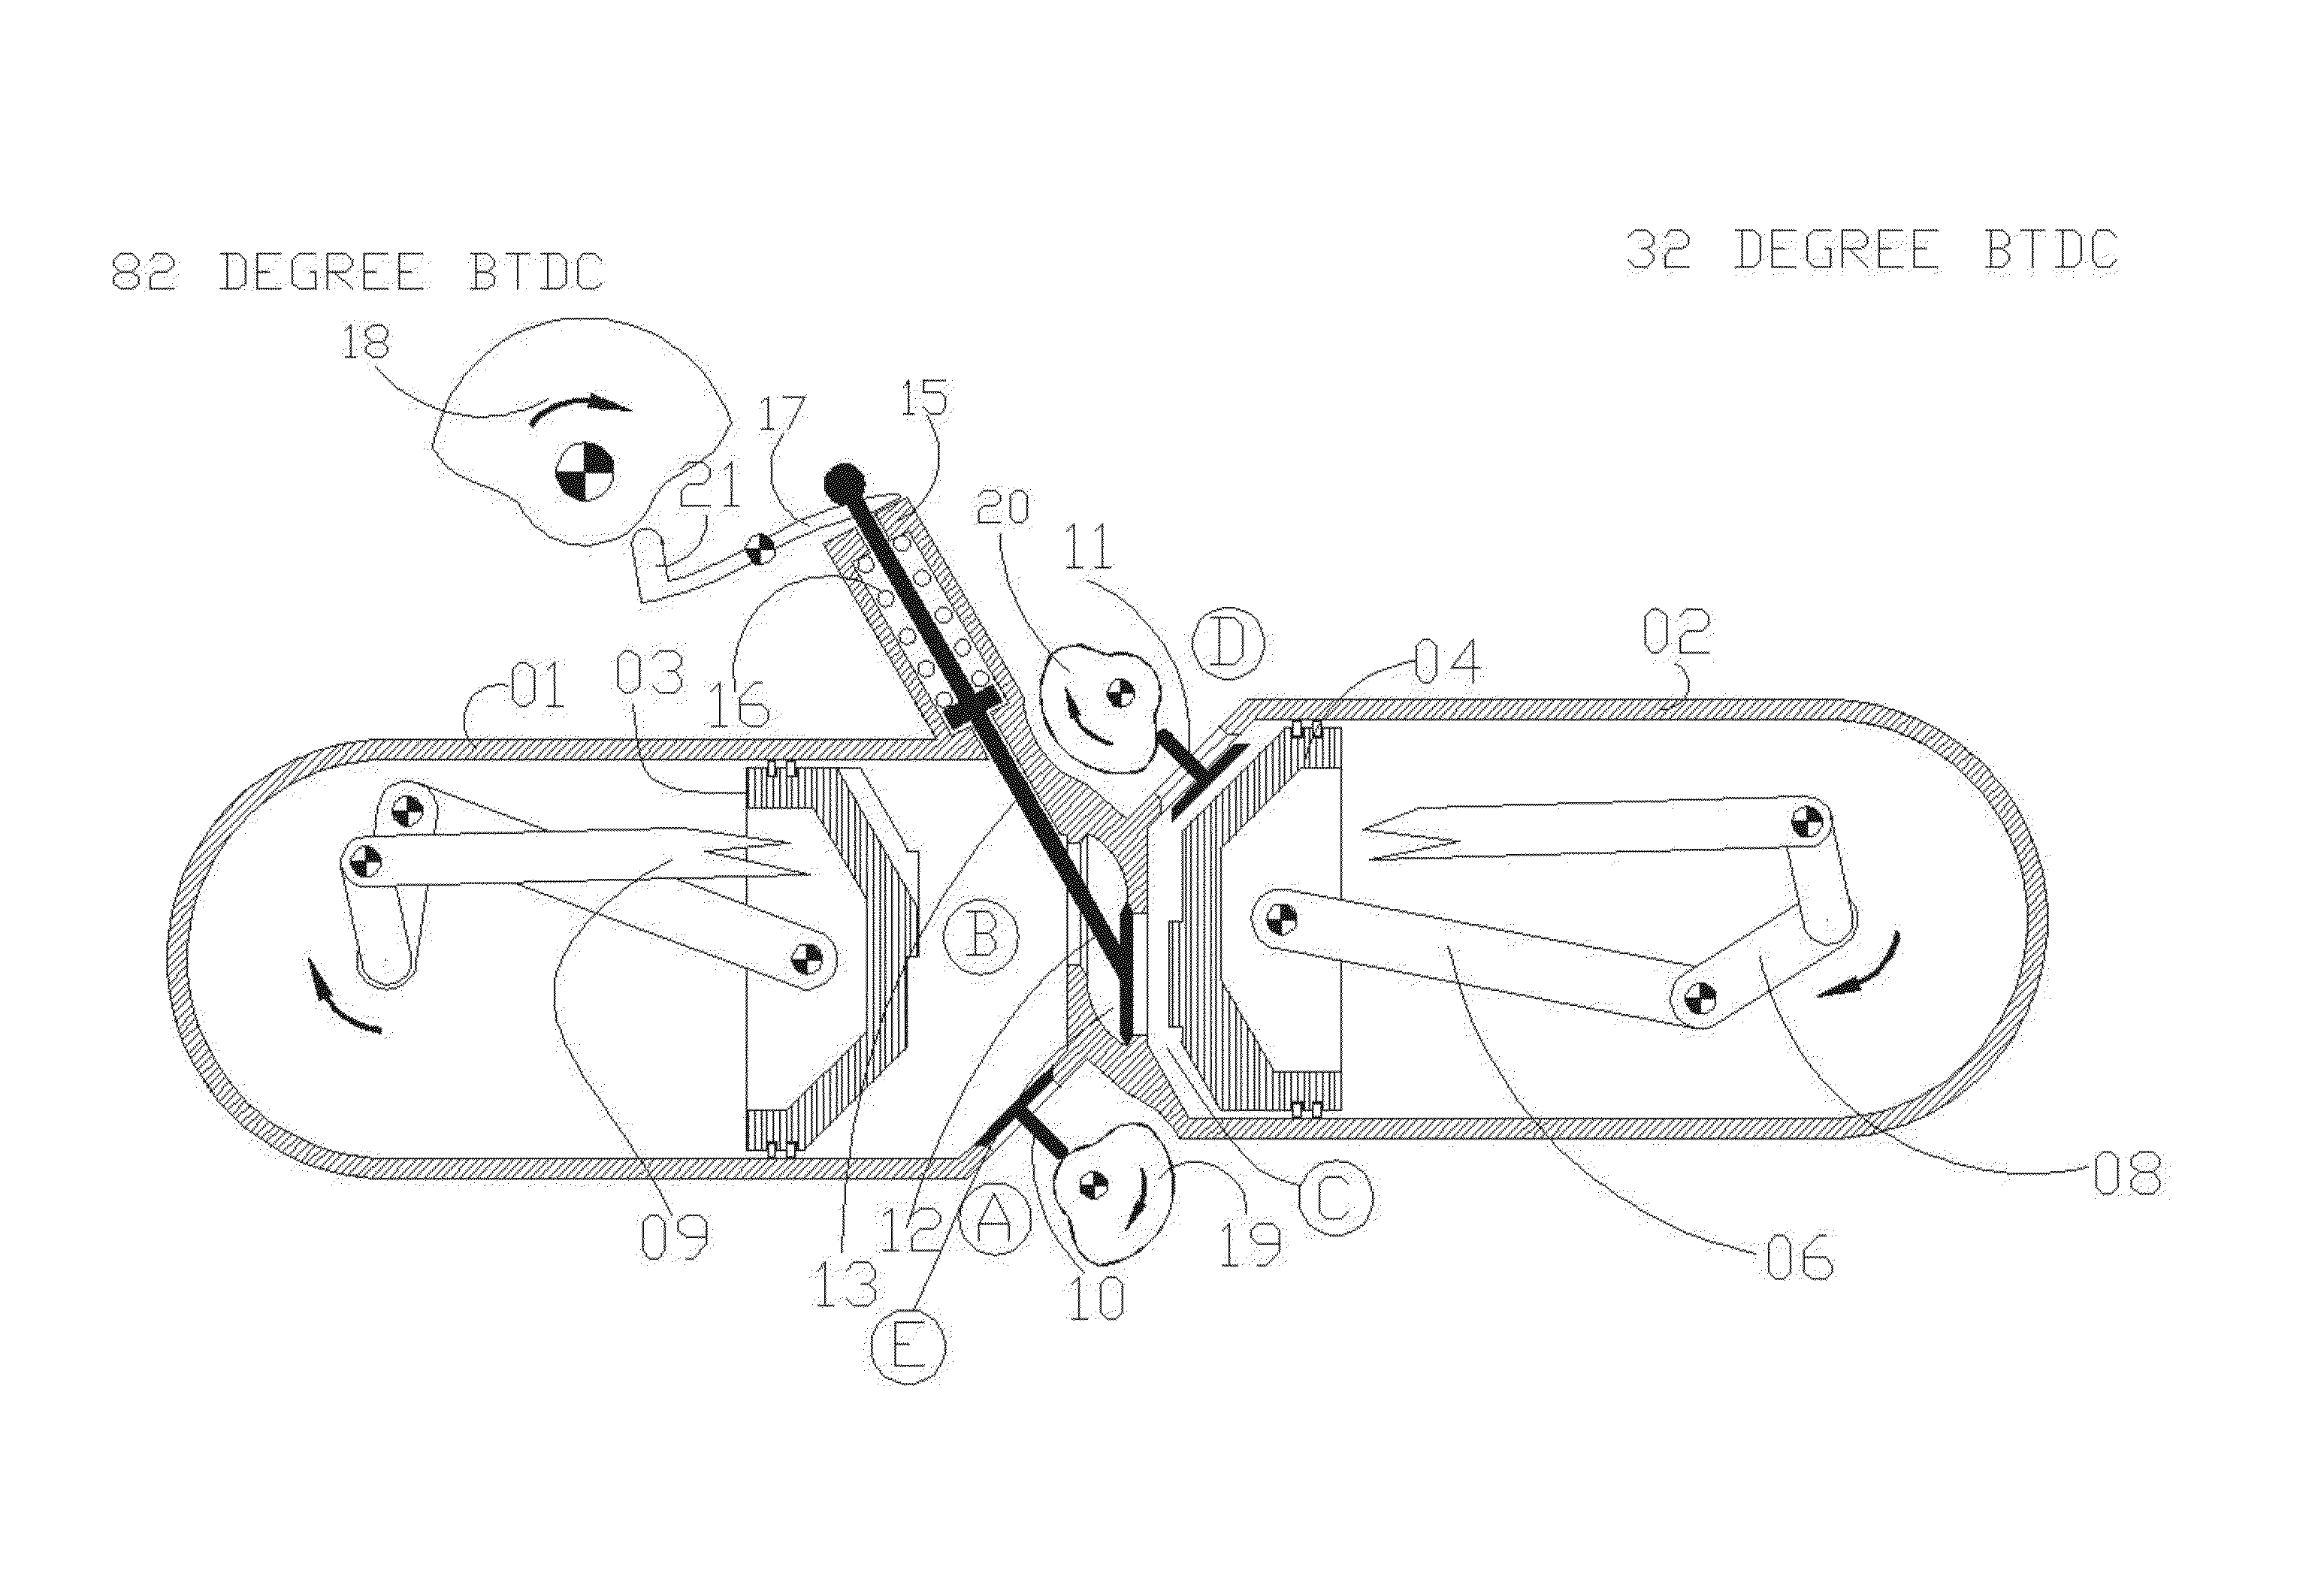 Crossover valve in double piston cycle engine